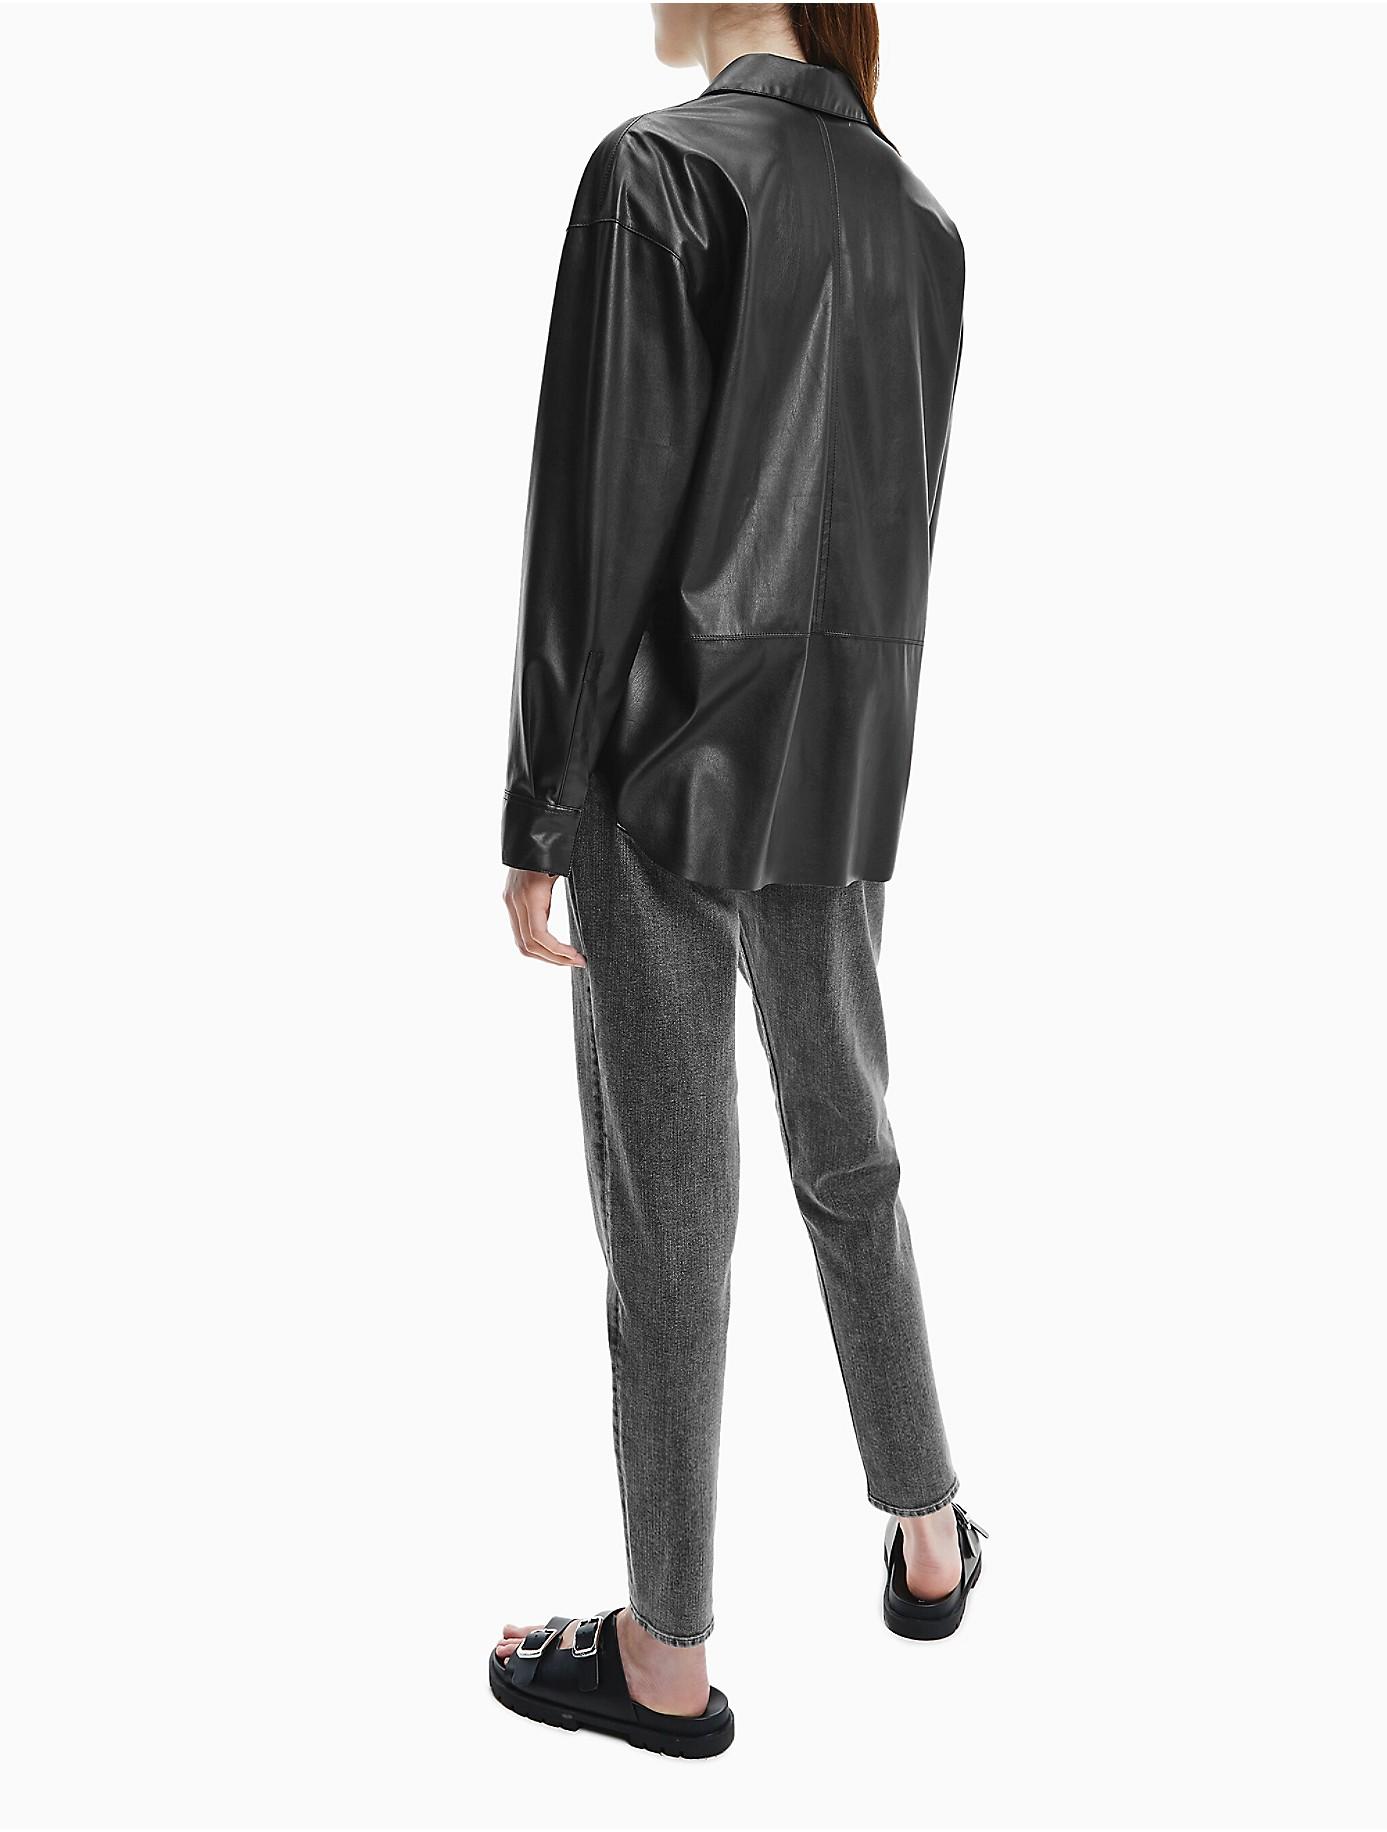 Calvin Klein Oversized Faux Leather Shirt Jacket in Black - Lyst